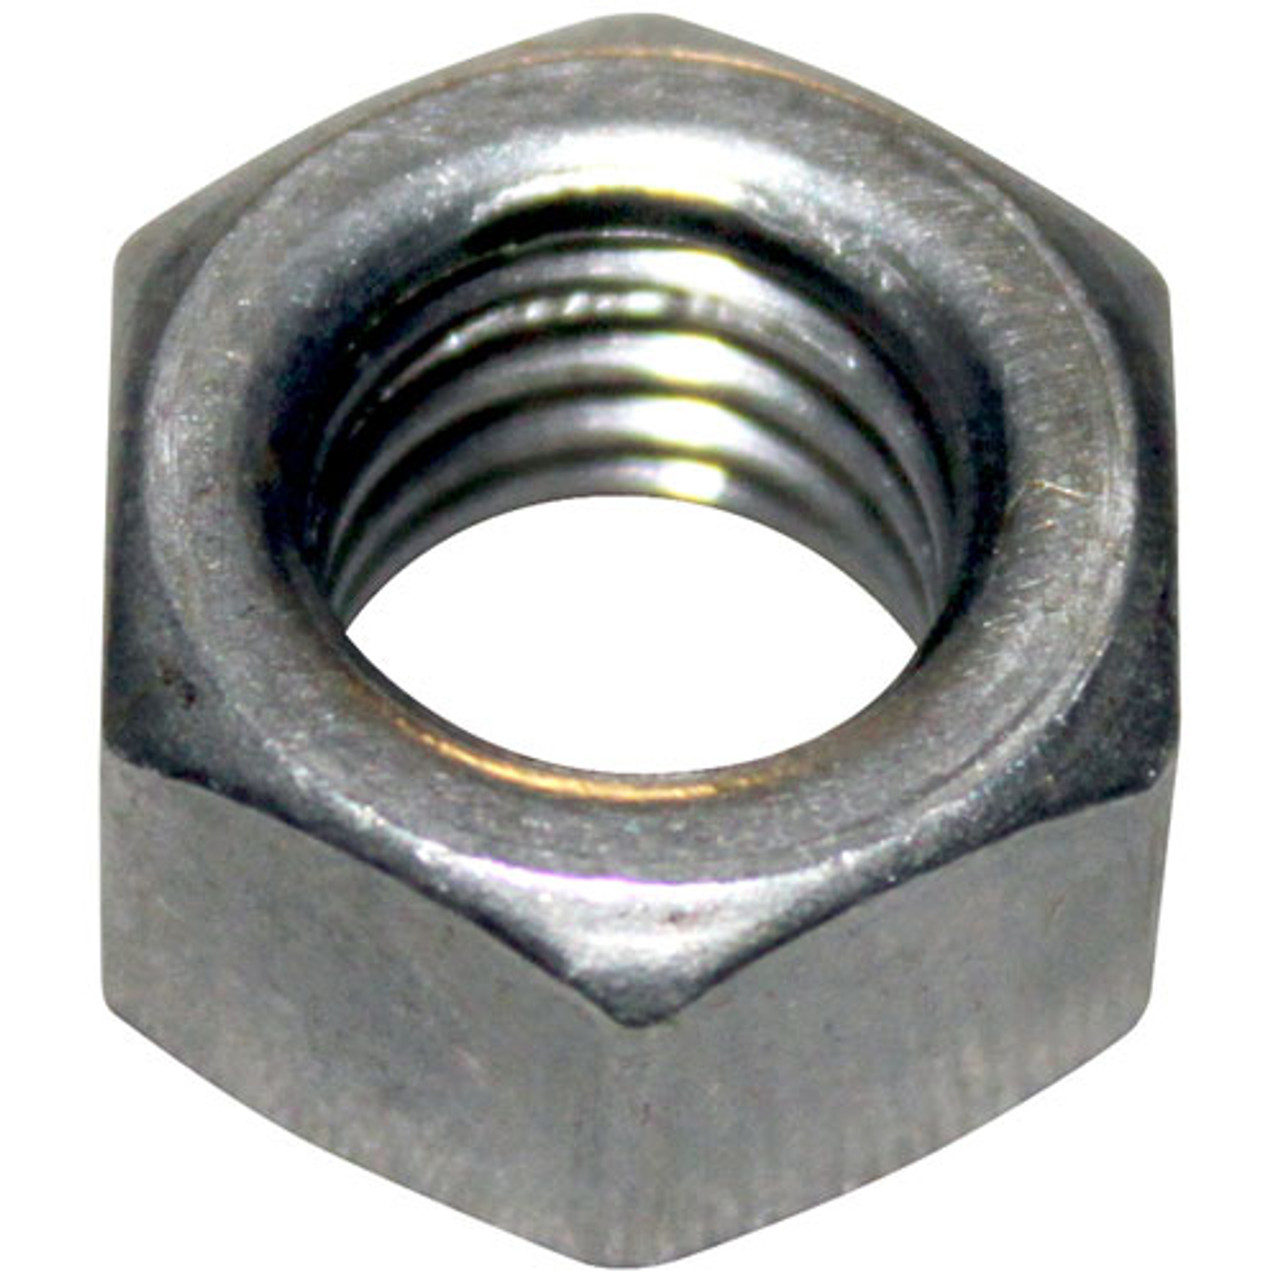 Hex Nut (Bx 100) 3/8-16 Fin 18-8 Ss - Replacement Part For AllPoints 261071